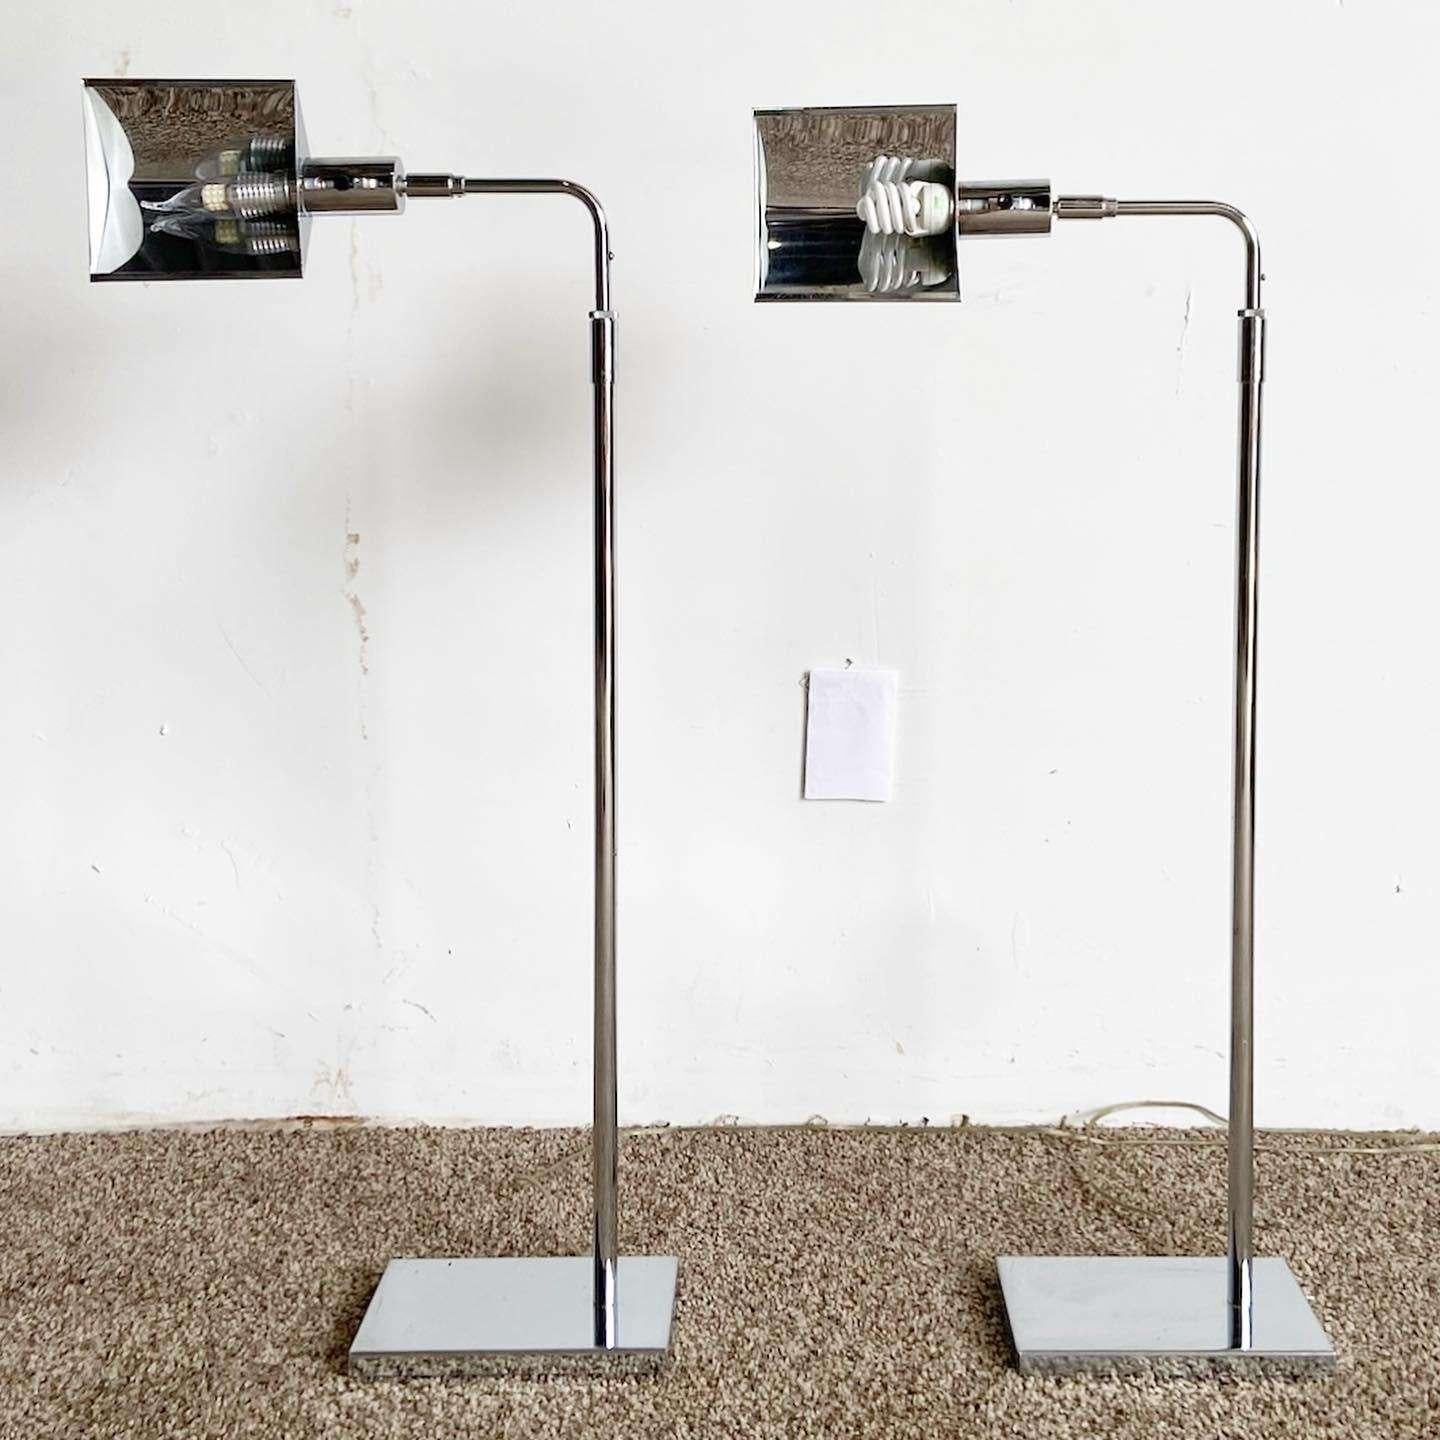 Exceptional pair of vintage mid century modern pharmacists lamps. Each feature a chrome finish.

Extends from 34.5” to 45.5” in